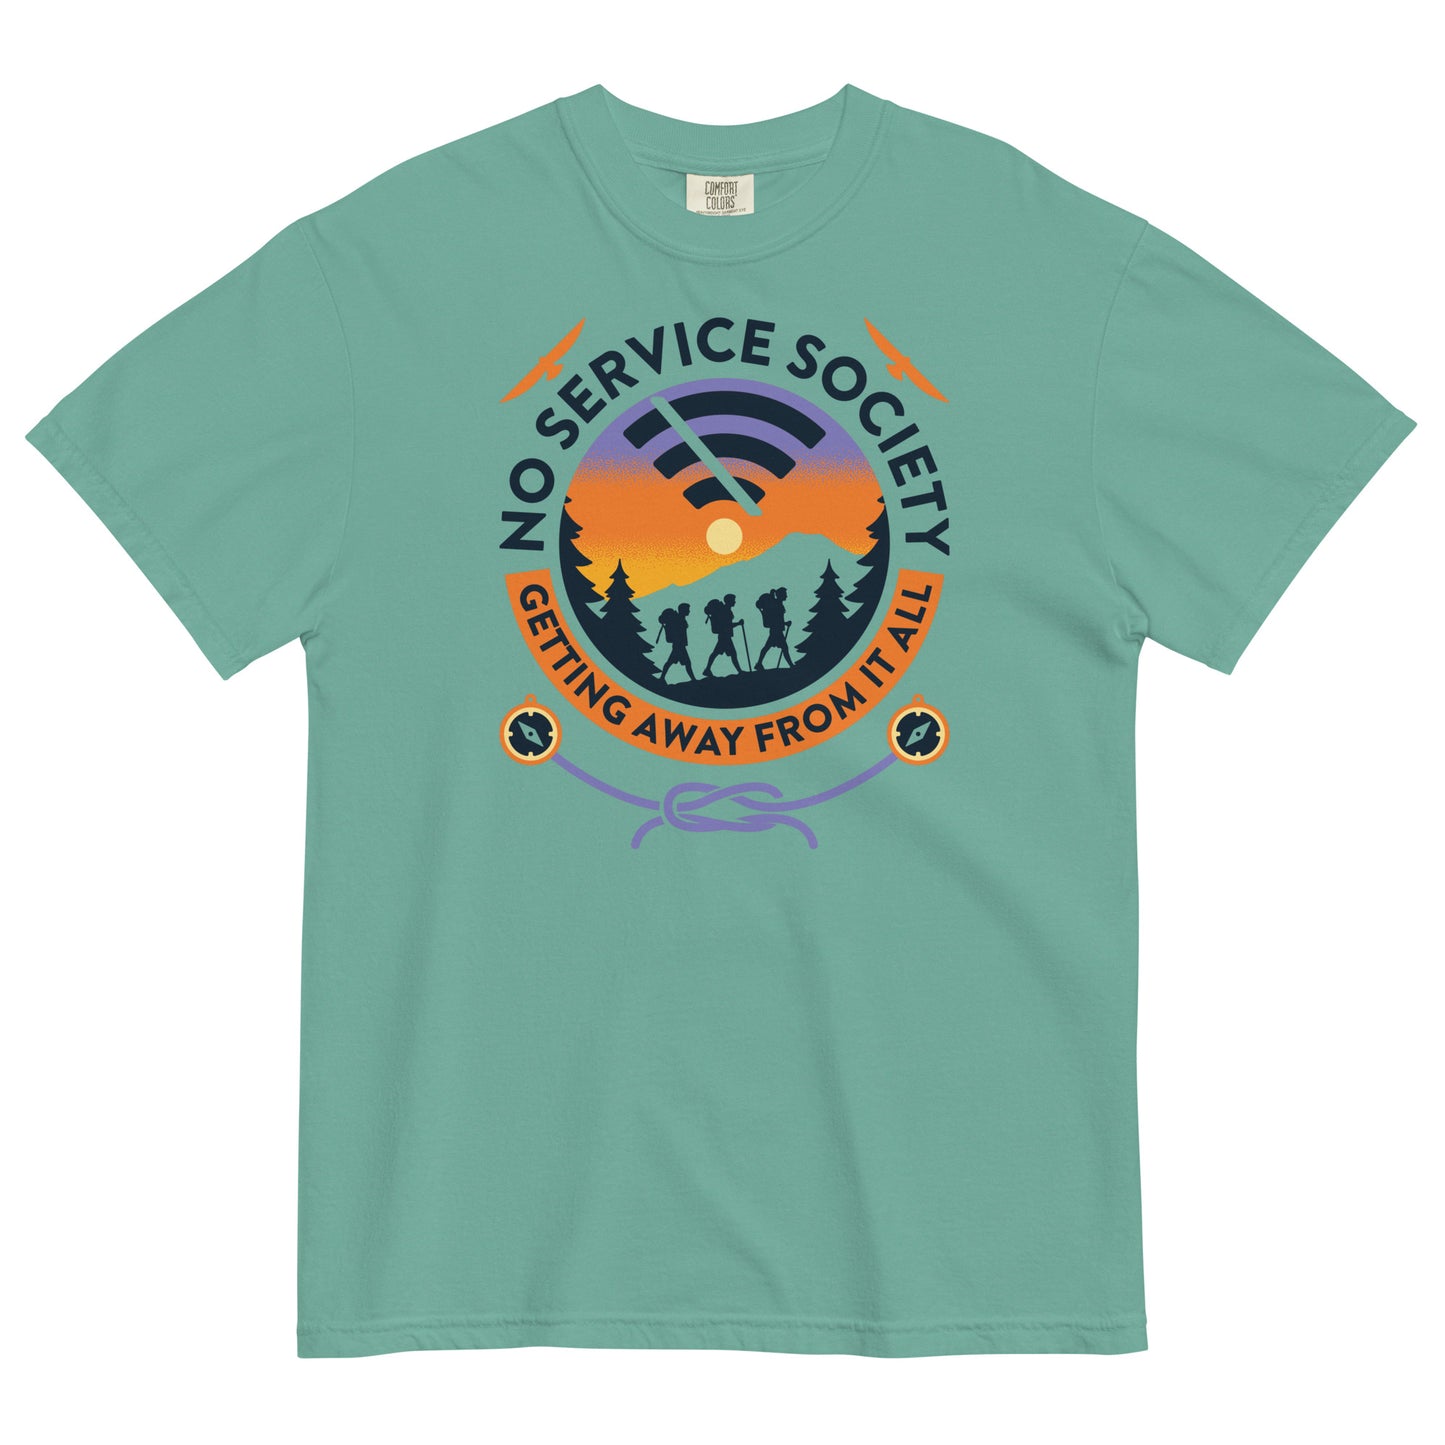 No Service Society Men's Relaxed Fit Tee